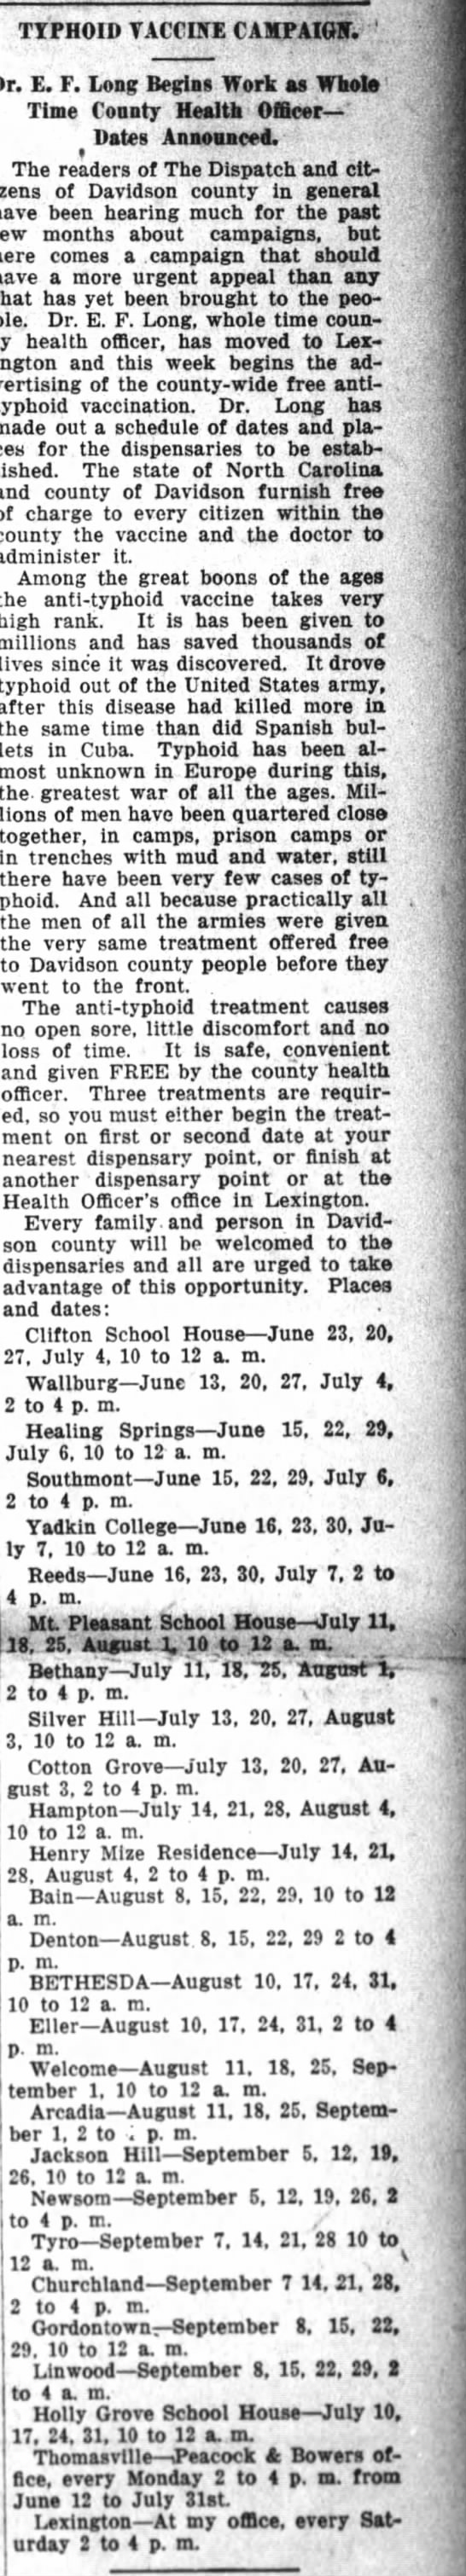 Typhoid Vaccine Campaign. The Dispatch. 7 June 1916 - 